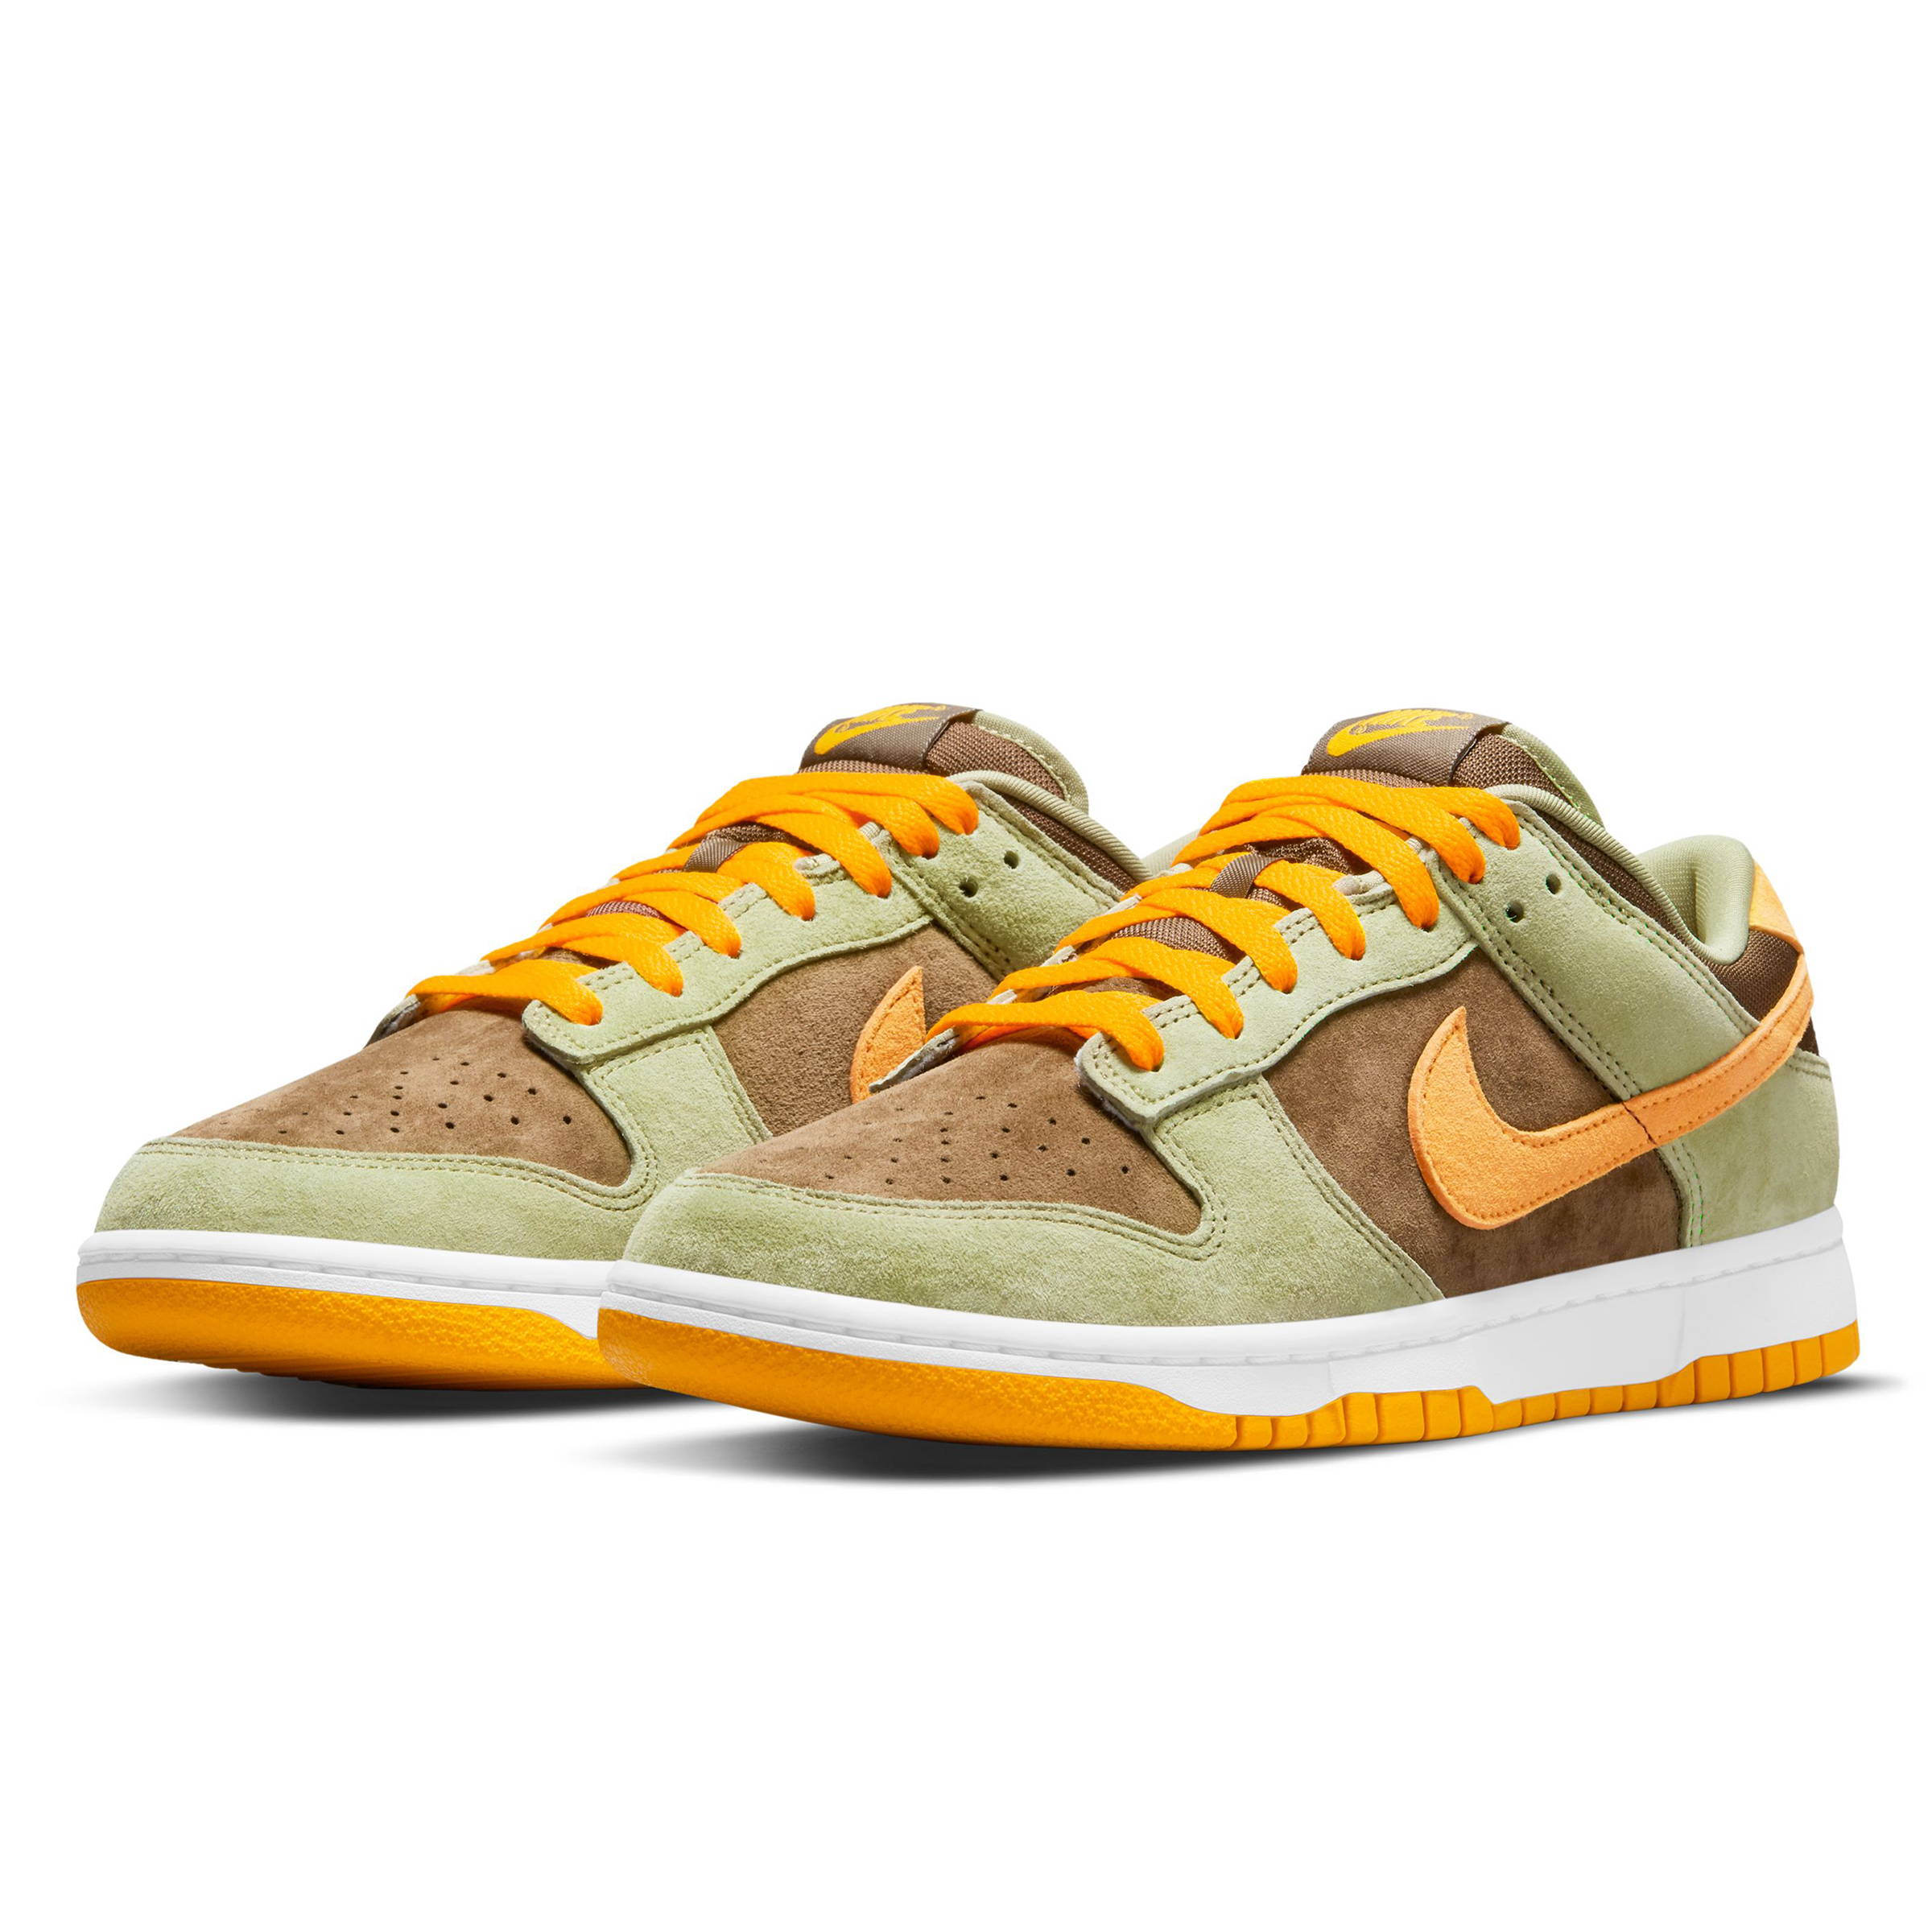 Nike Dunk Low SE 'Dusty Olive' - Upcoming Releases | Bodega